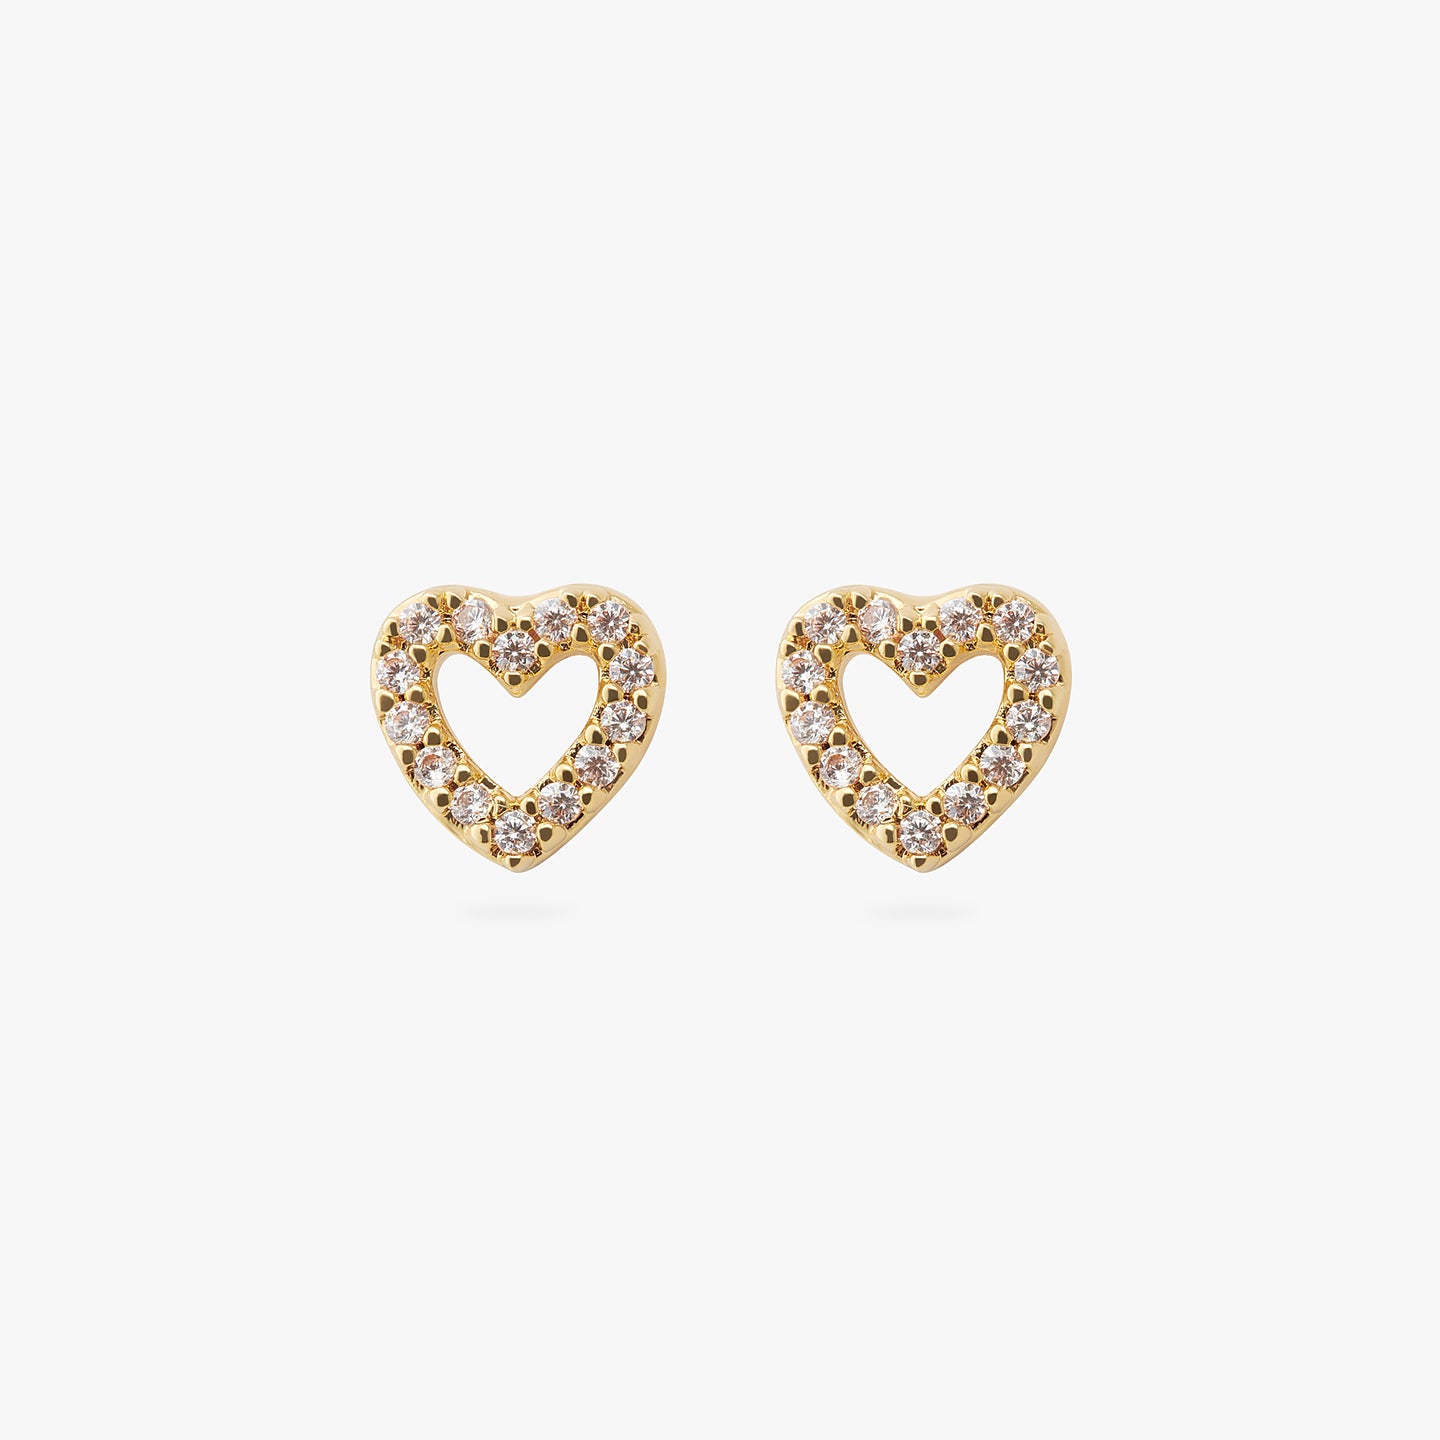 a pair of gold studs consisting of CZs in the shape of a heart [pair] color:null|gold/clear